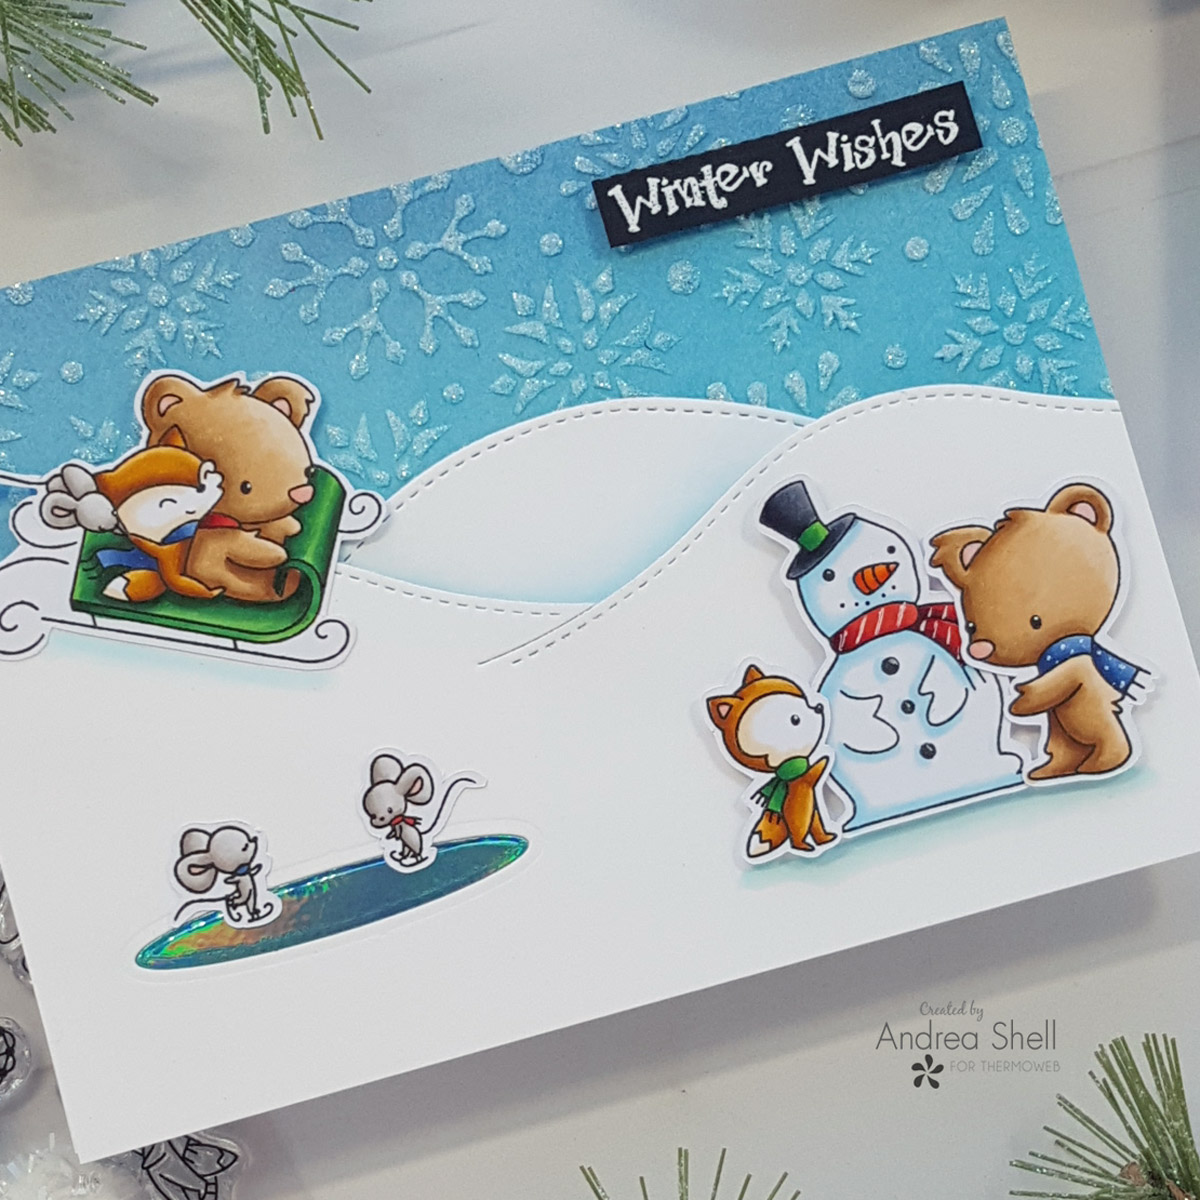 Winter Wishes card by Andrea Shell | Snow Much Fun stamp by LDRS Creative